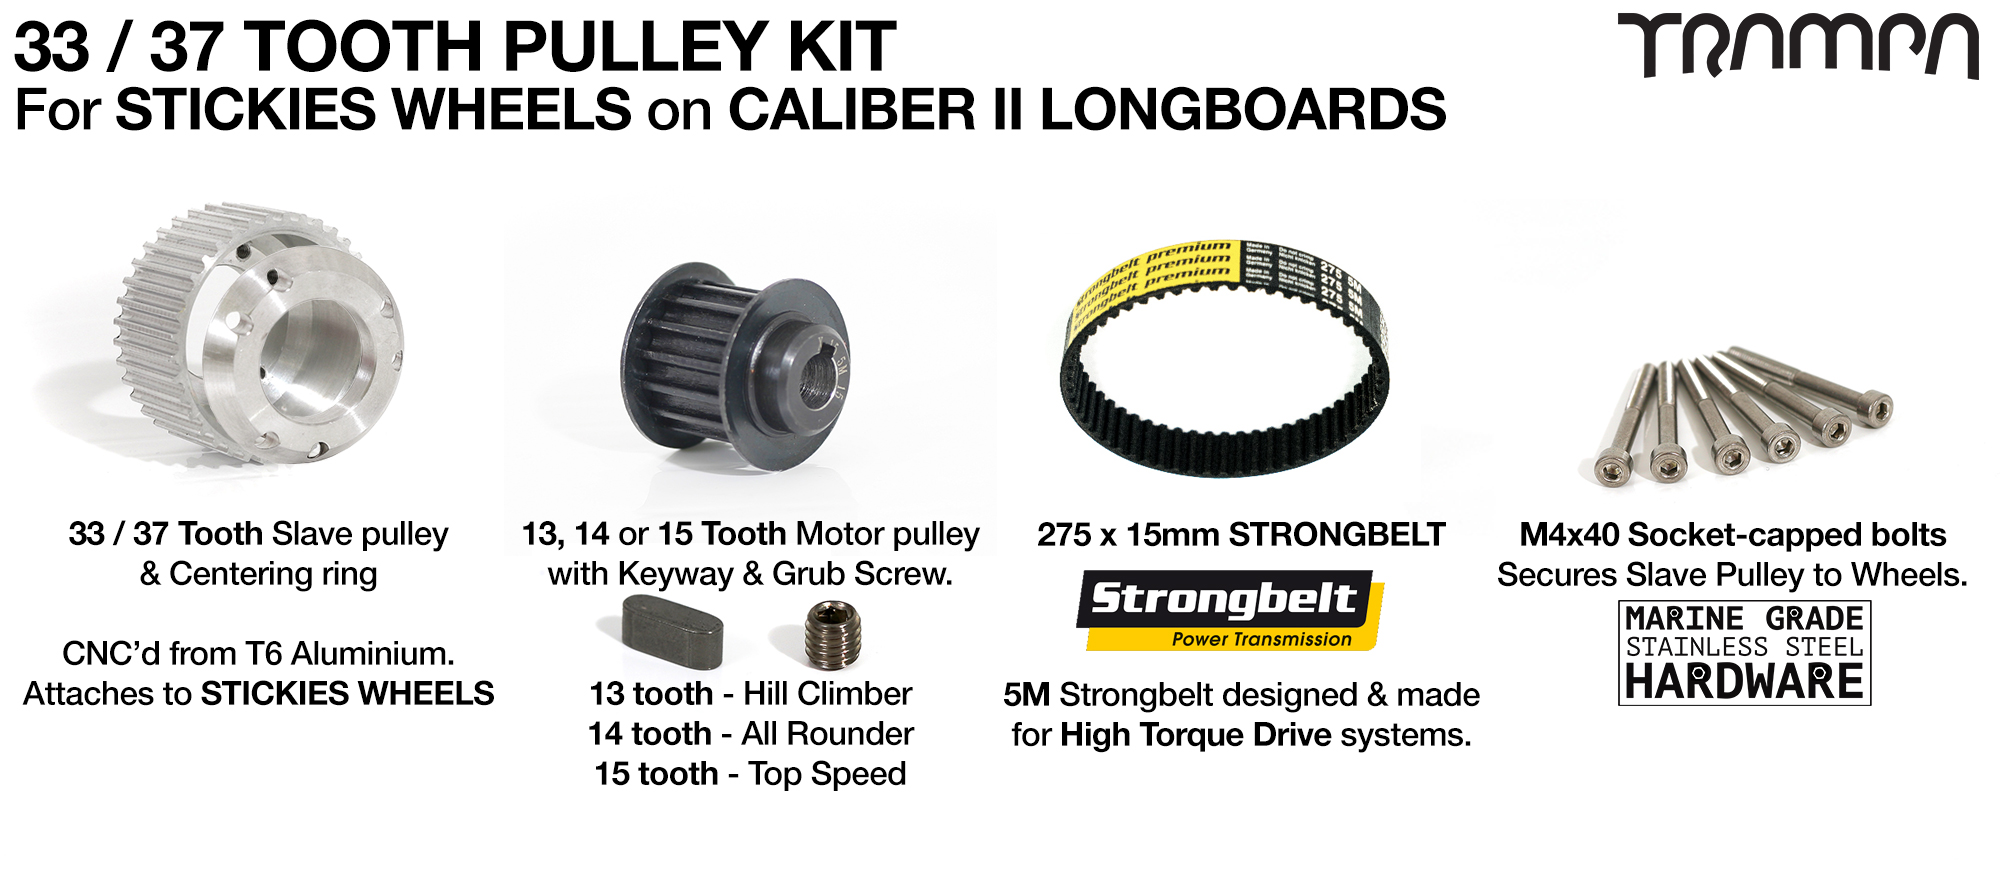 CALIBER II Truck Pulley kit with 33 or 37 Tooth Slave & 275 x 15mm Belt for 83 or 90mm STICKIES Wheels